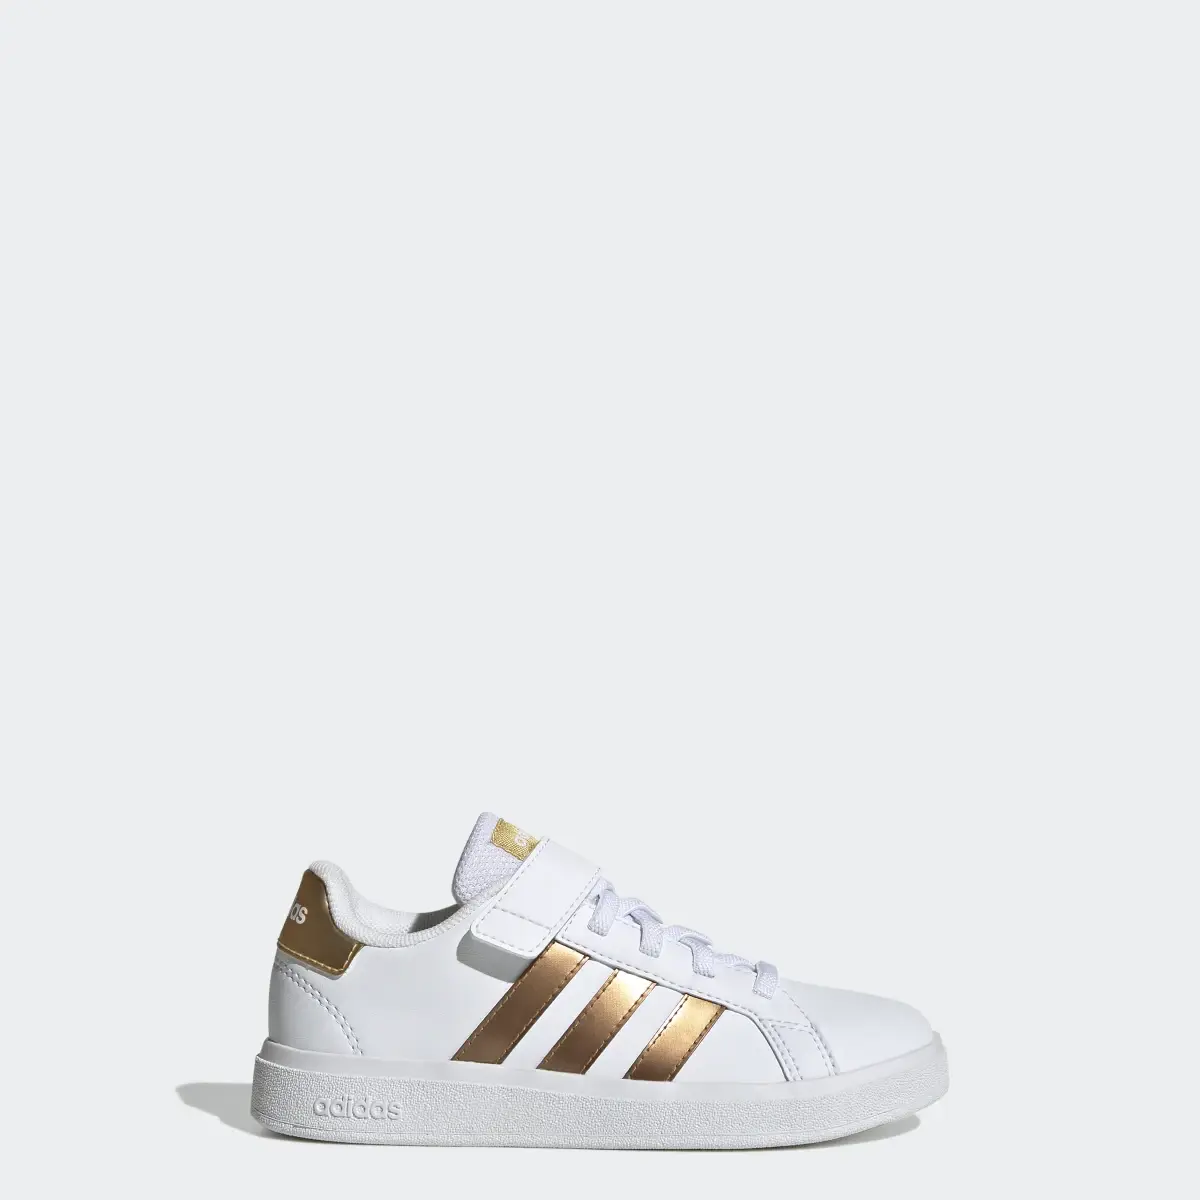 Adidas Grand Court Sustainable Elastic Lace and Top Strap Shoes. 1